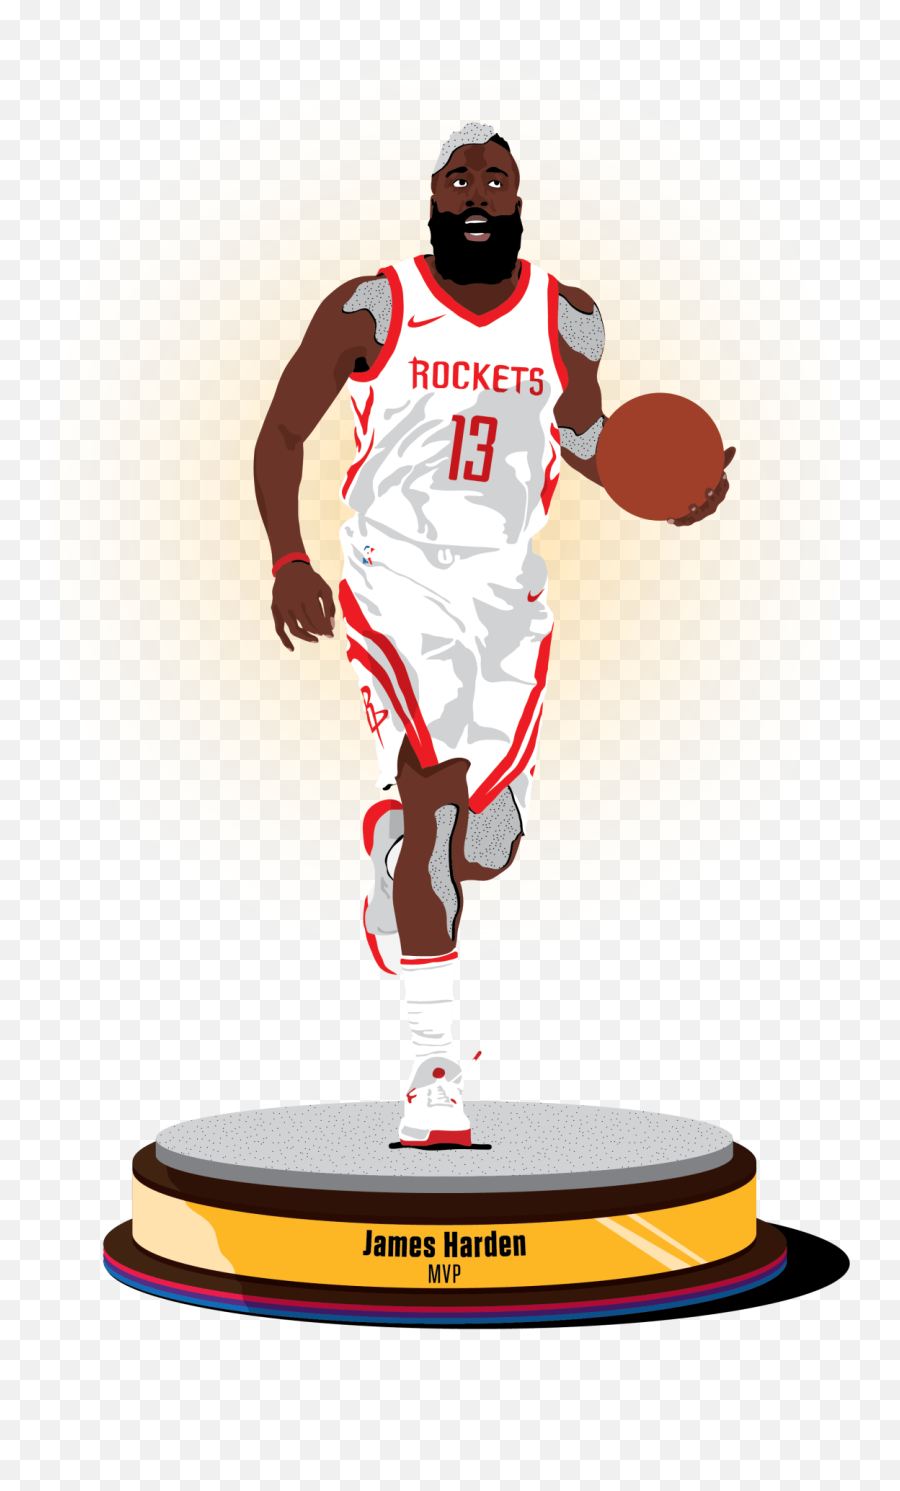 James Harden Is Our Nba Mvp At The All - For Basketball Emoji,James Harden No Emotion